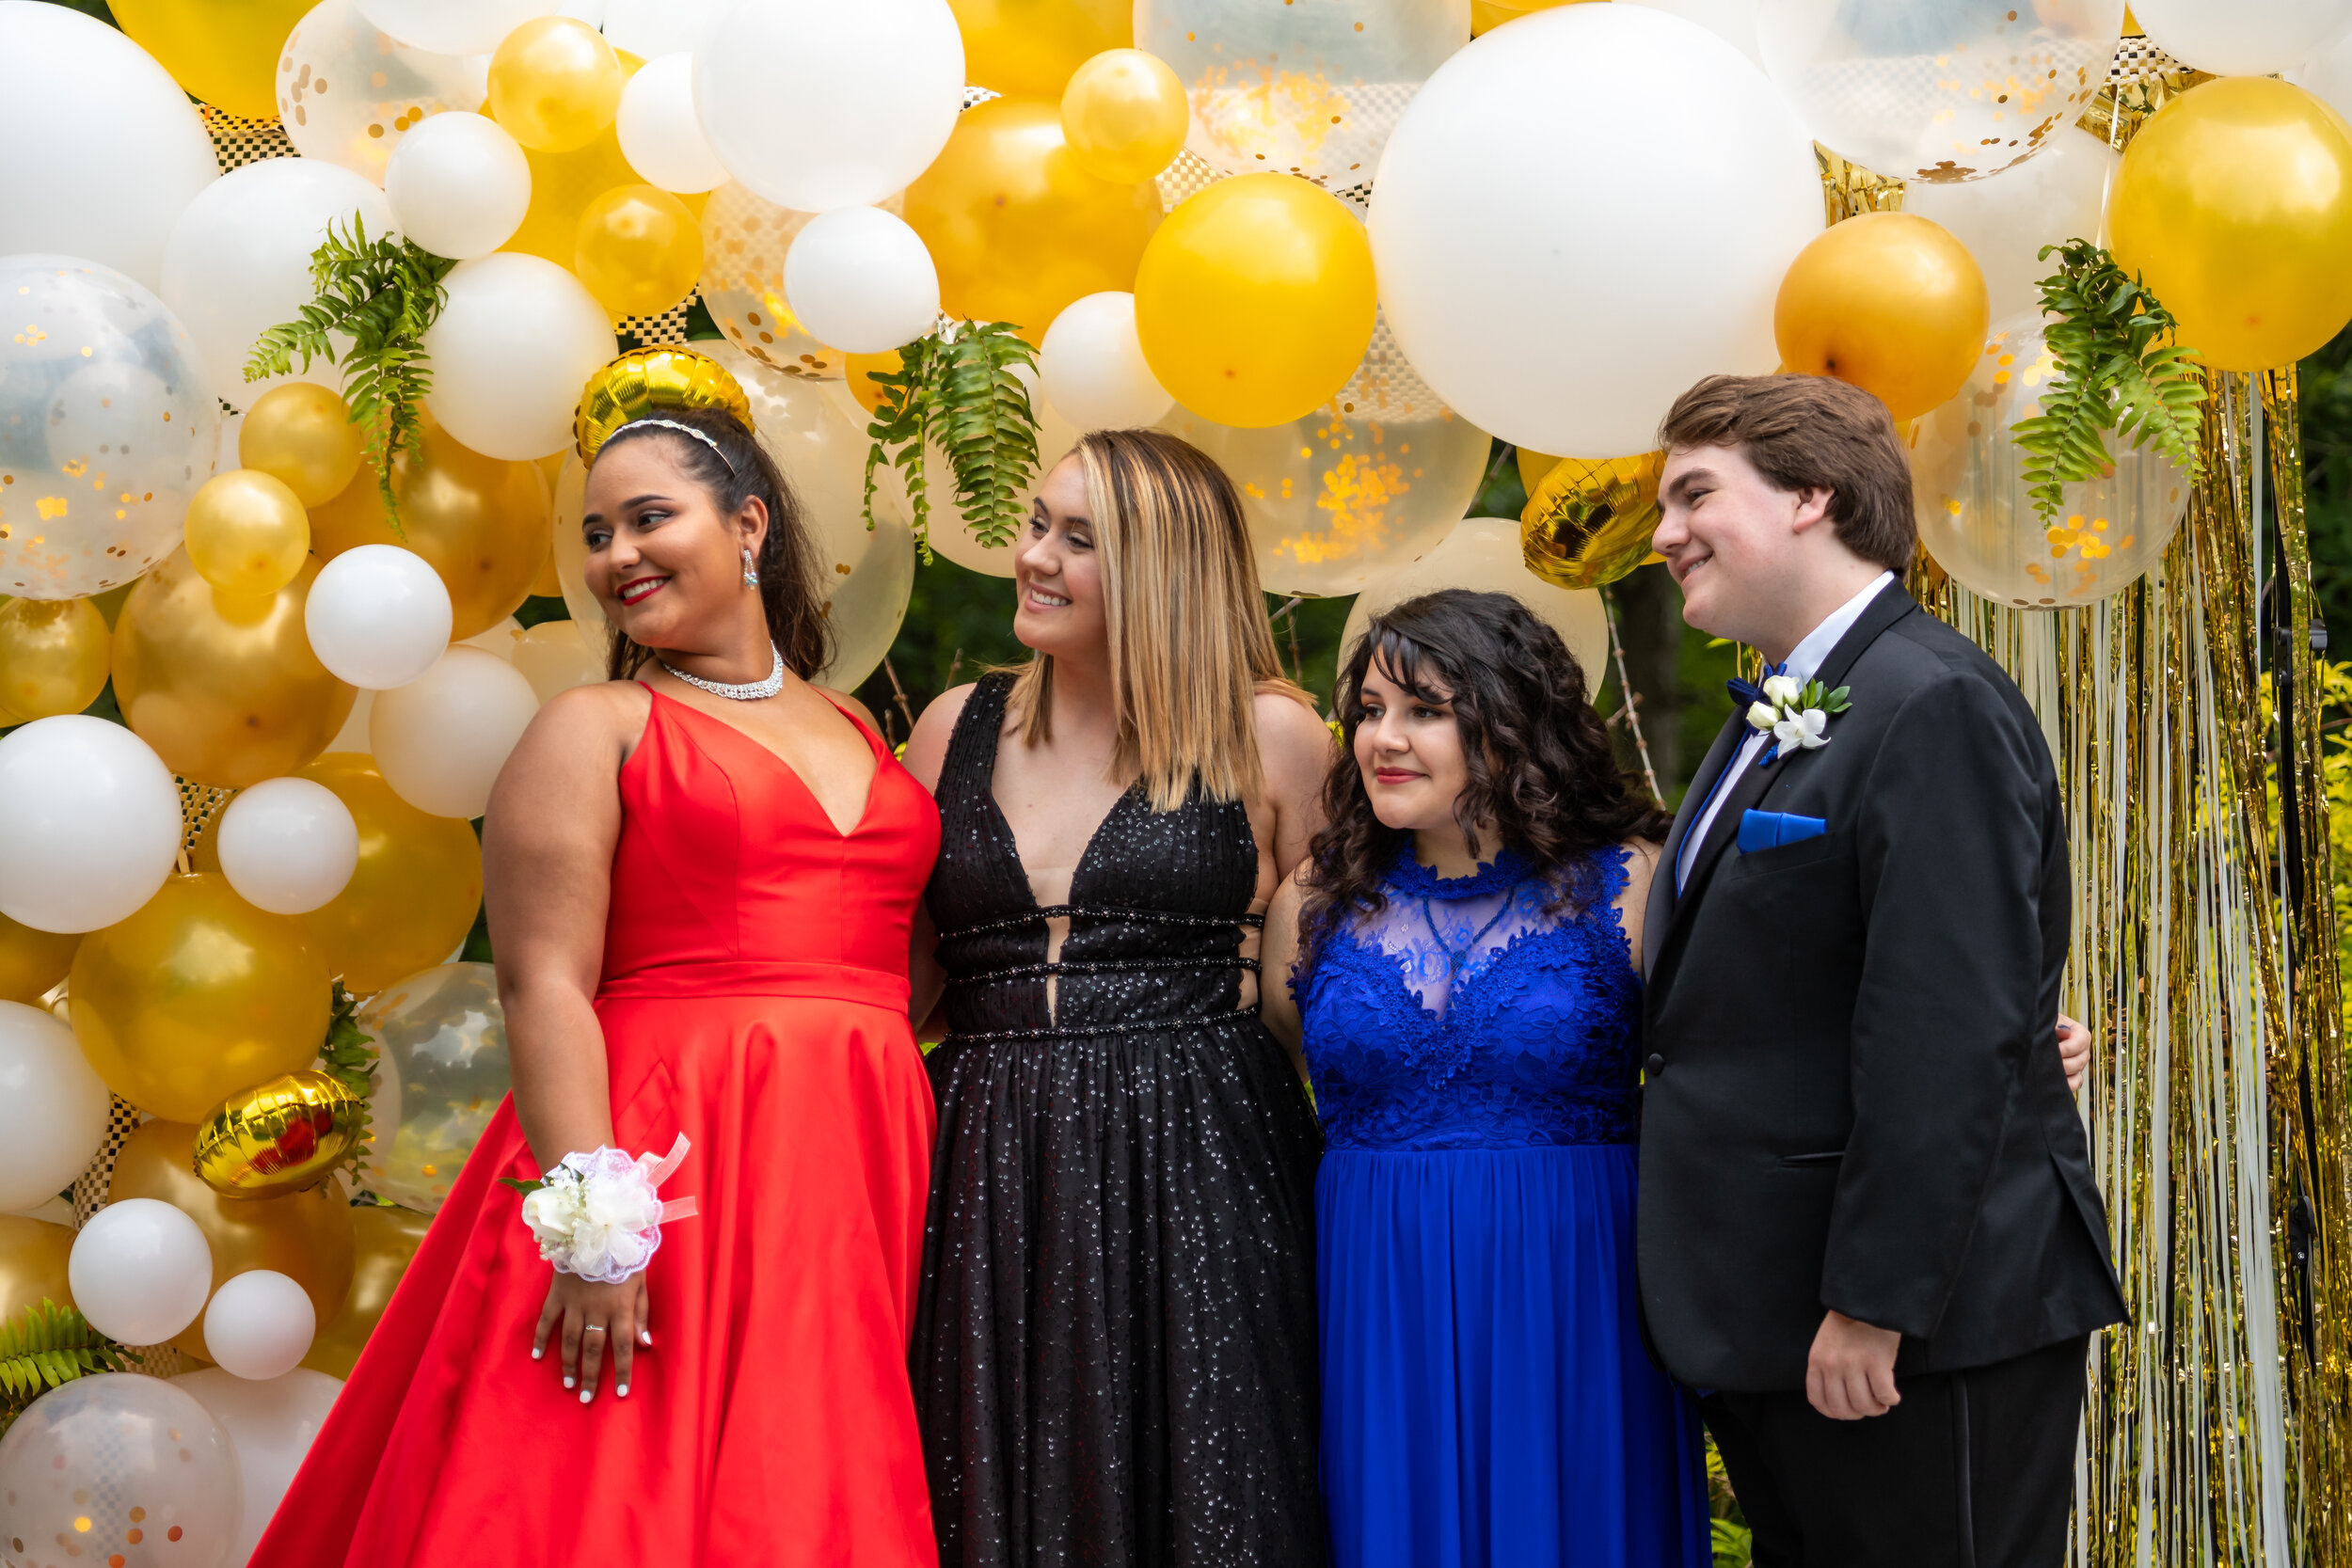 Prom Party Spring 2019 - Full Res Edits-69.jpg